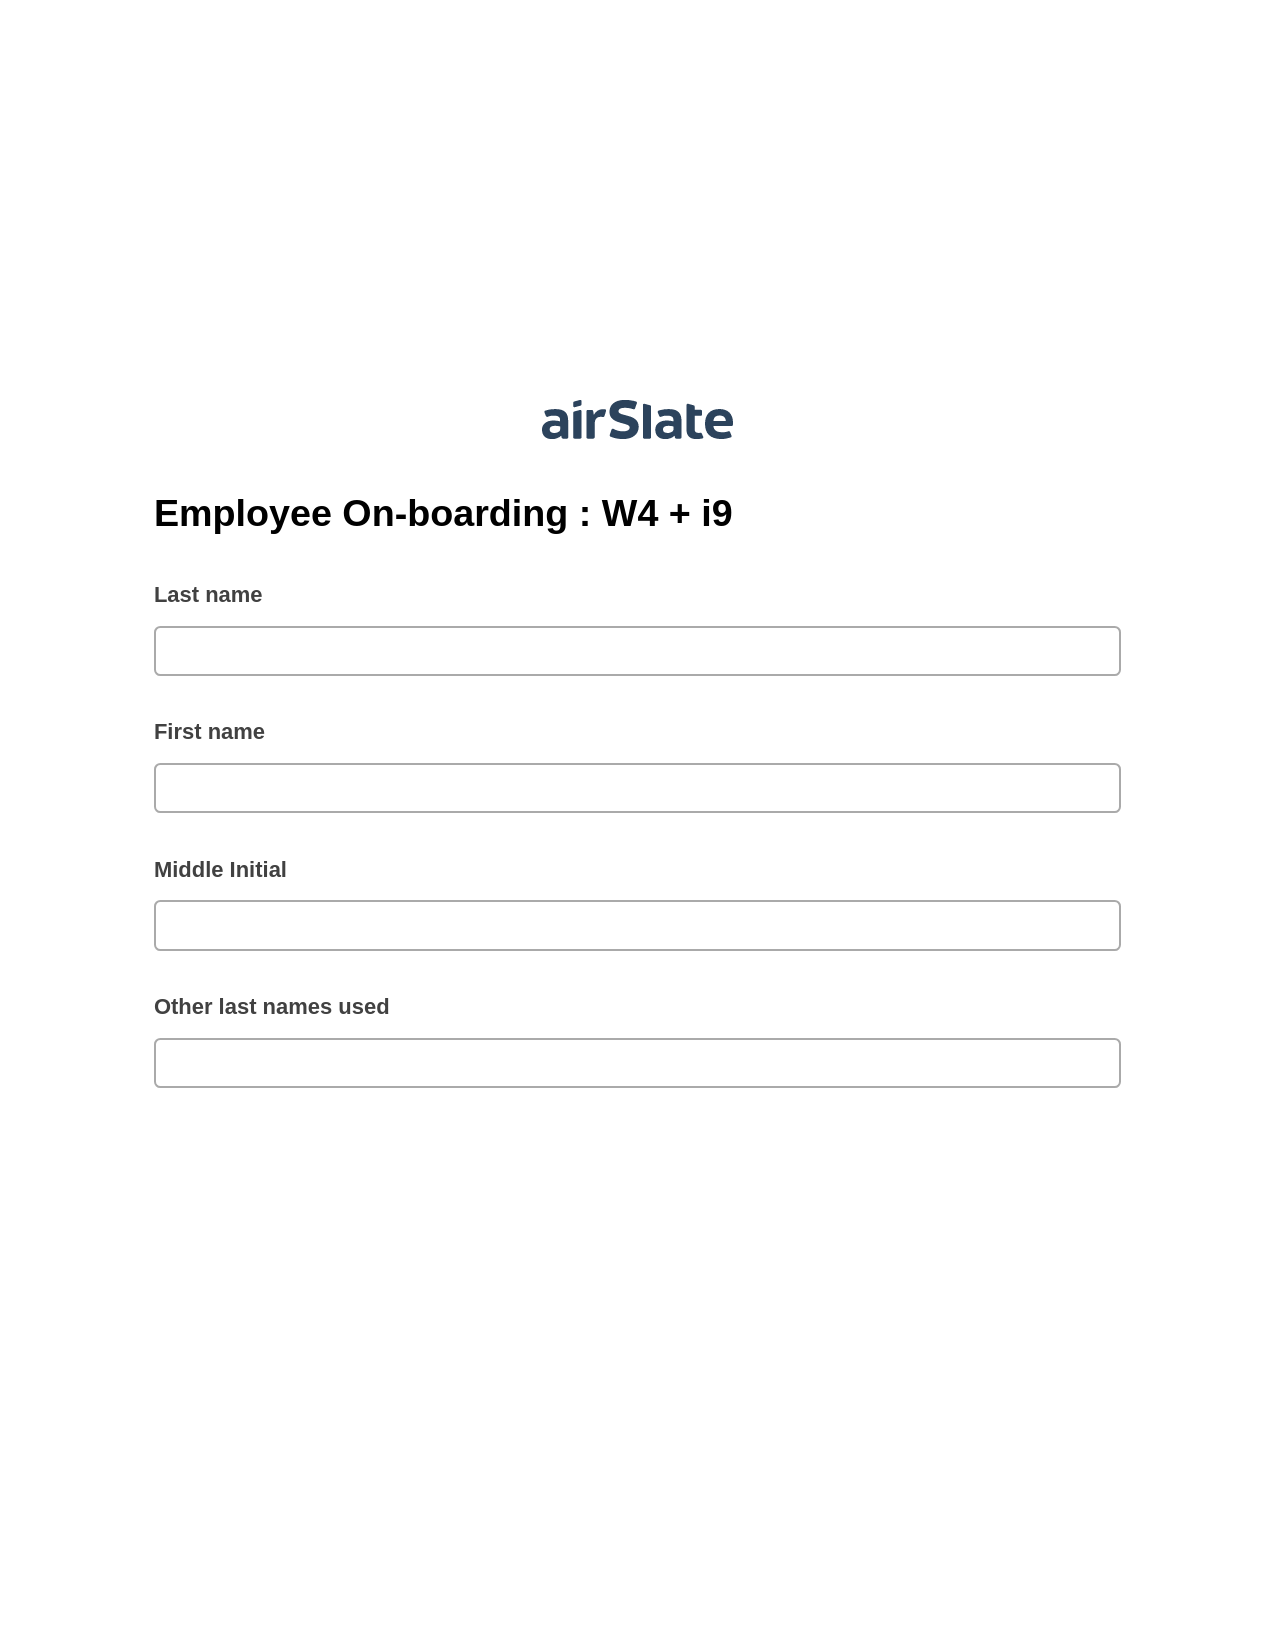 Employee On-boarding : W4 + i9 Pre-fill Slate from MS Dynamics 365 Records Bot, Remove Slate Bot, Post-finish Document Bot